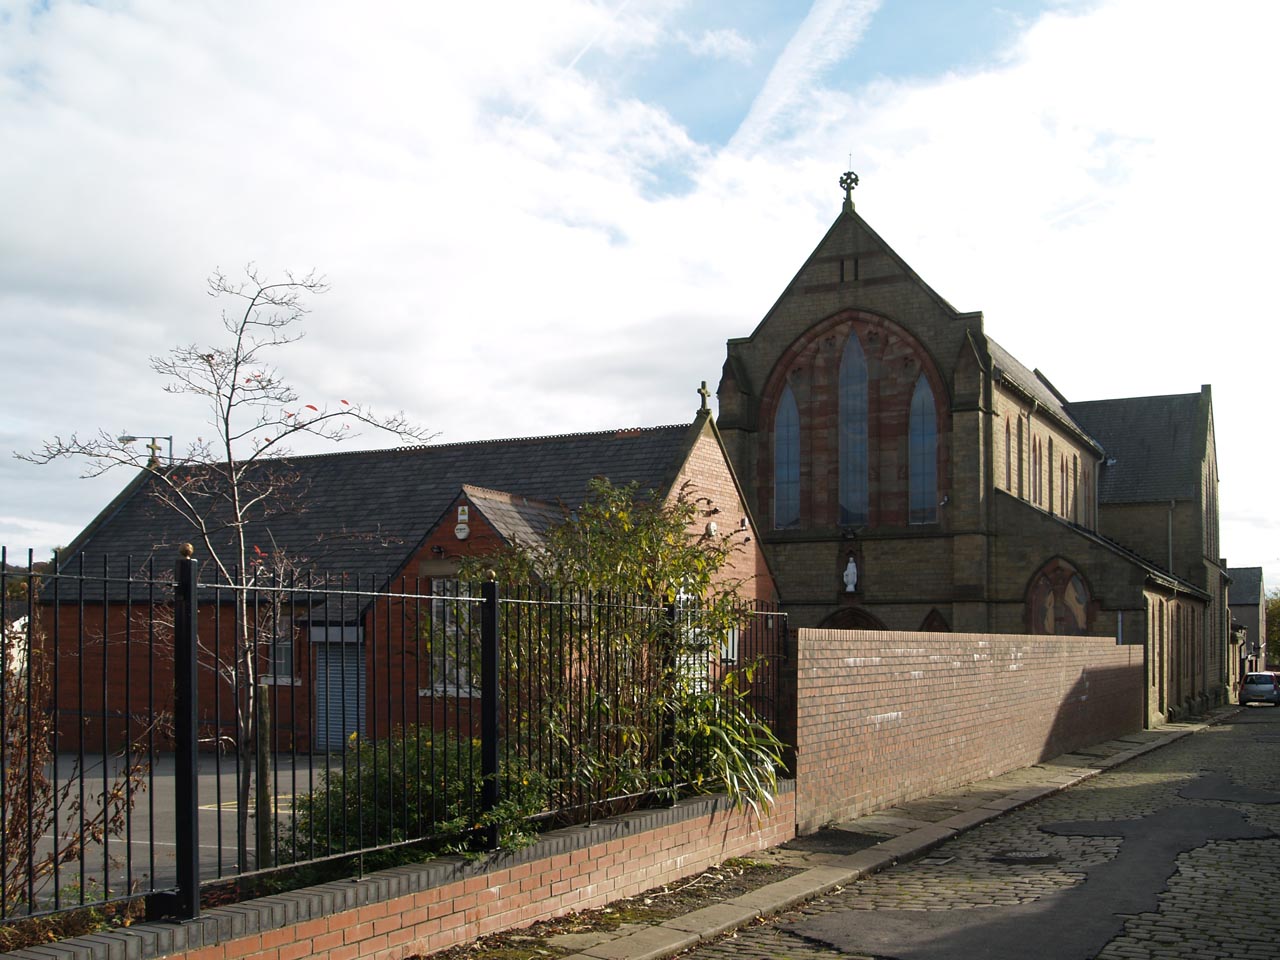 The Church of St Mary, with the School